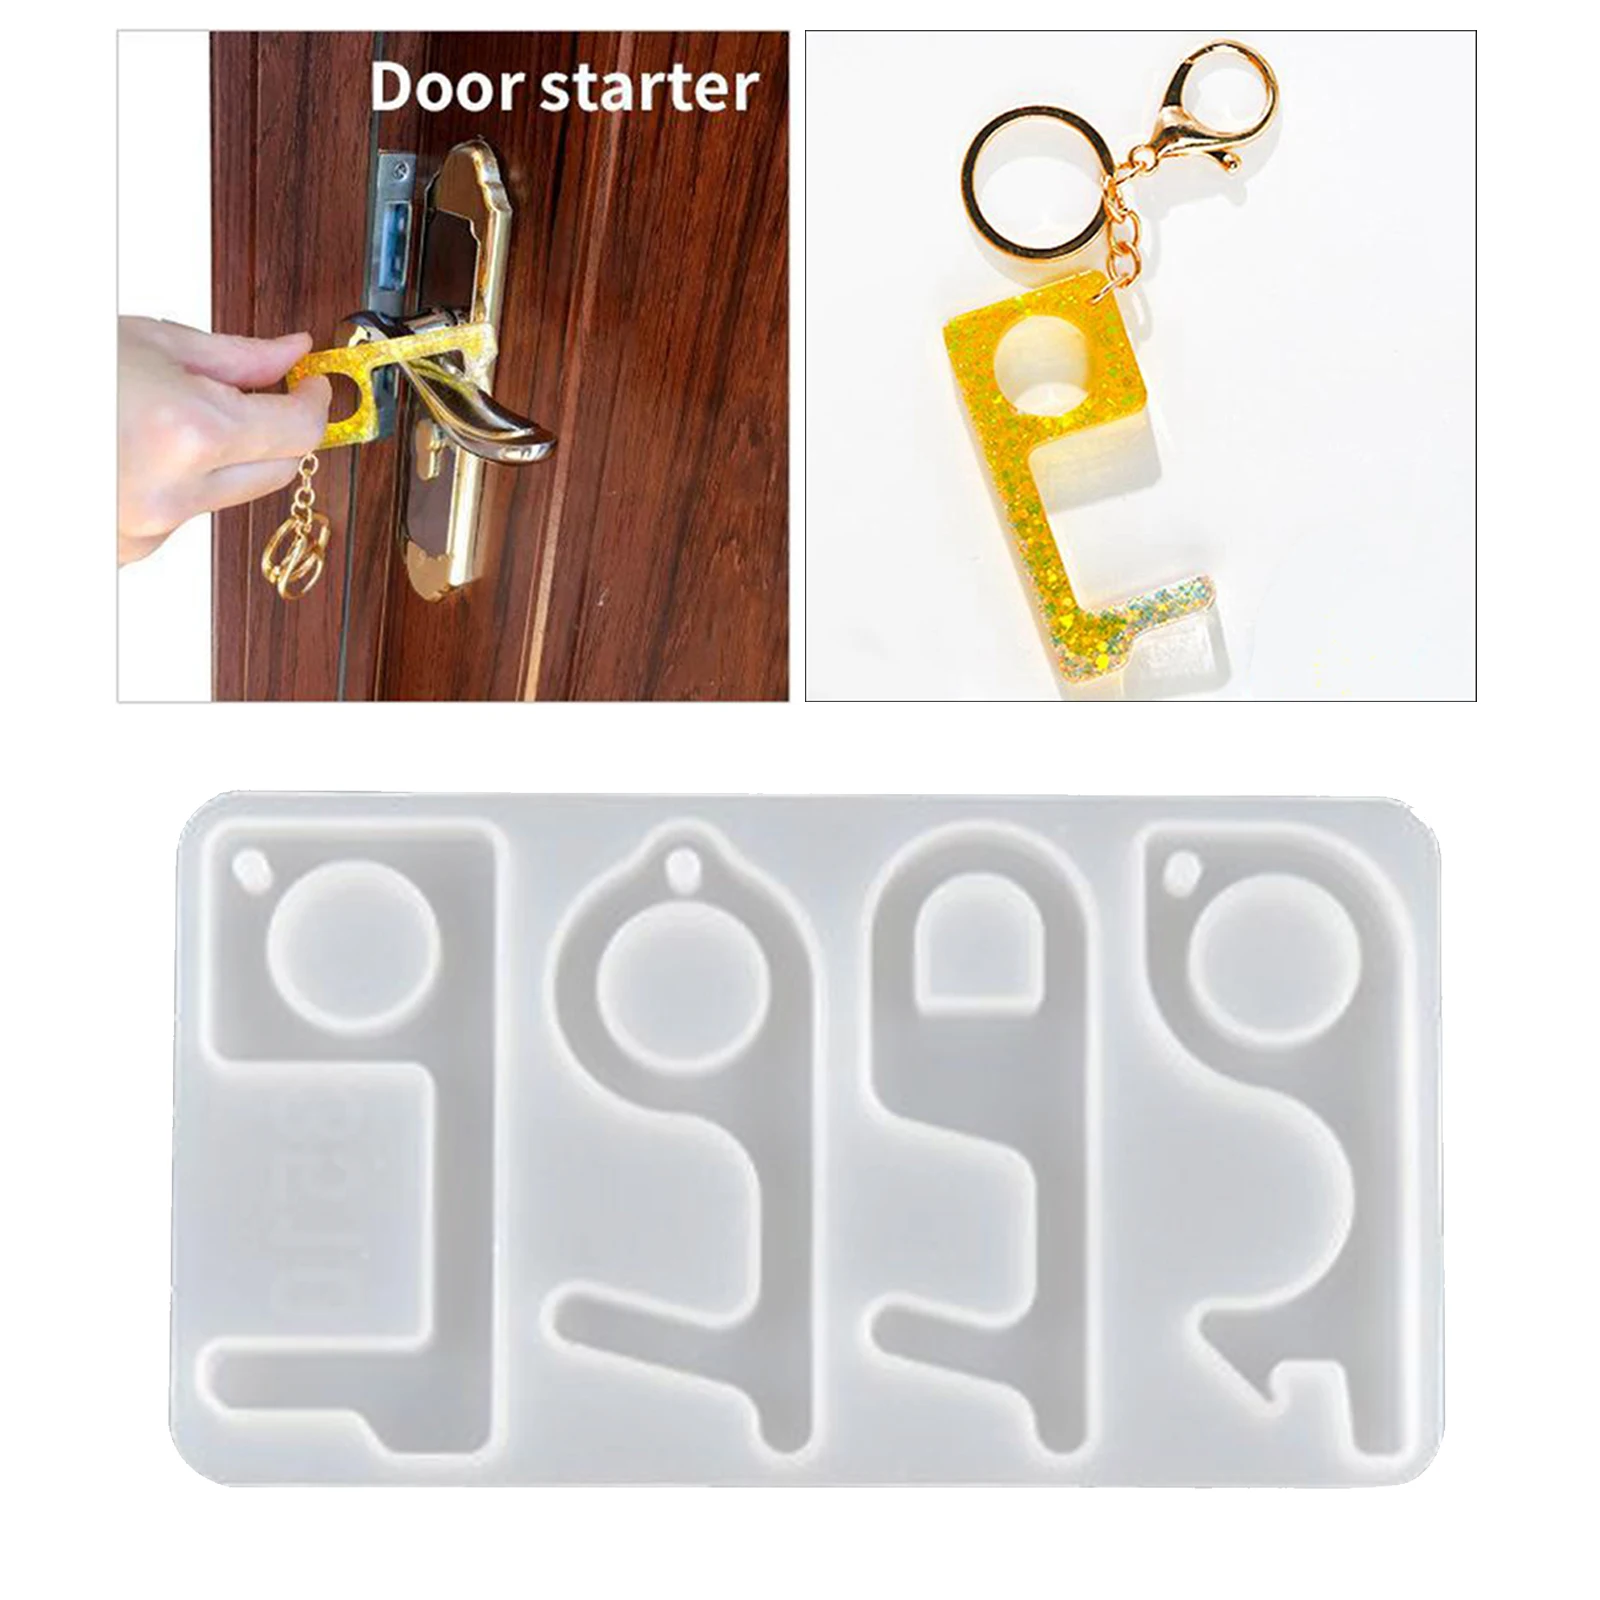 DIY Keychain Epoxy Resin Silicone Mold for Making Touchless Door Opener Keys 8.3x14.8x0.8cm